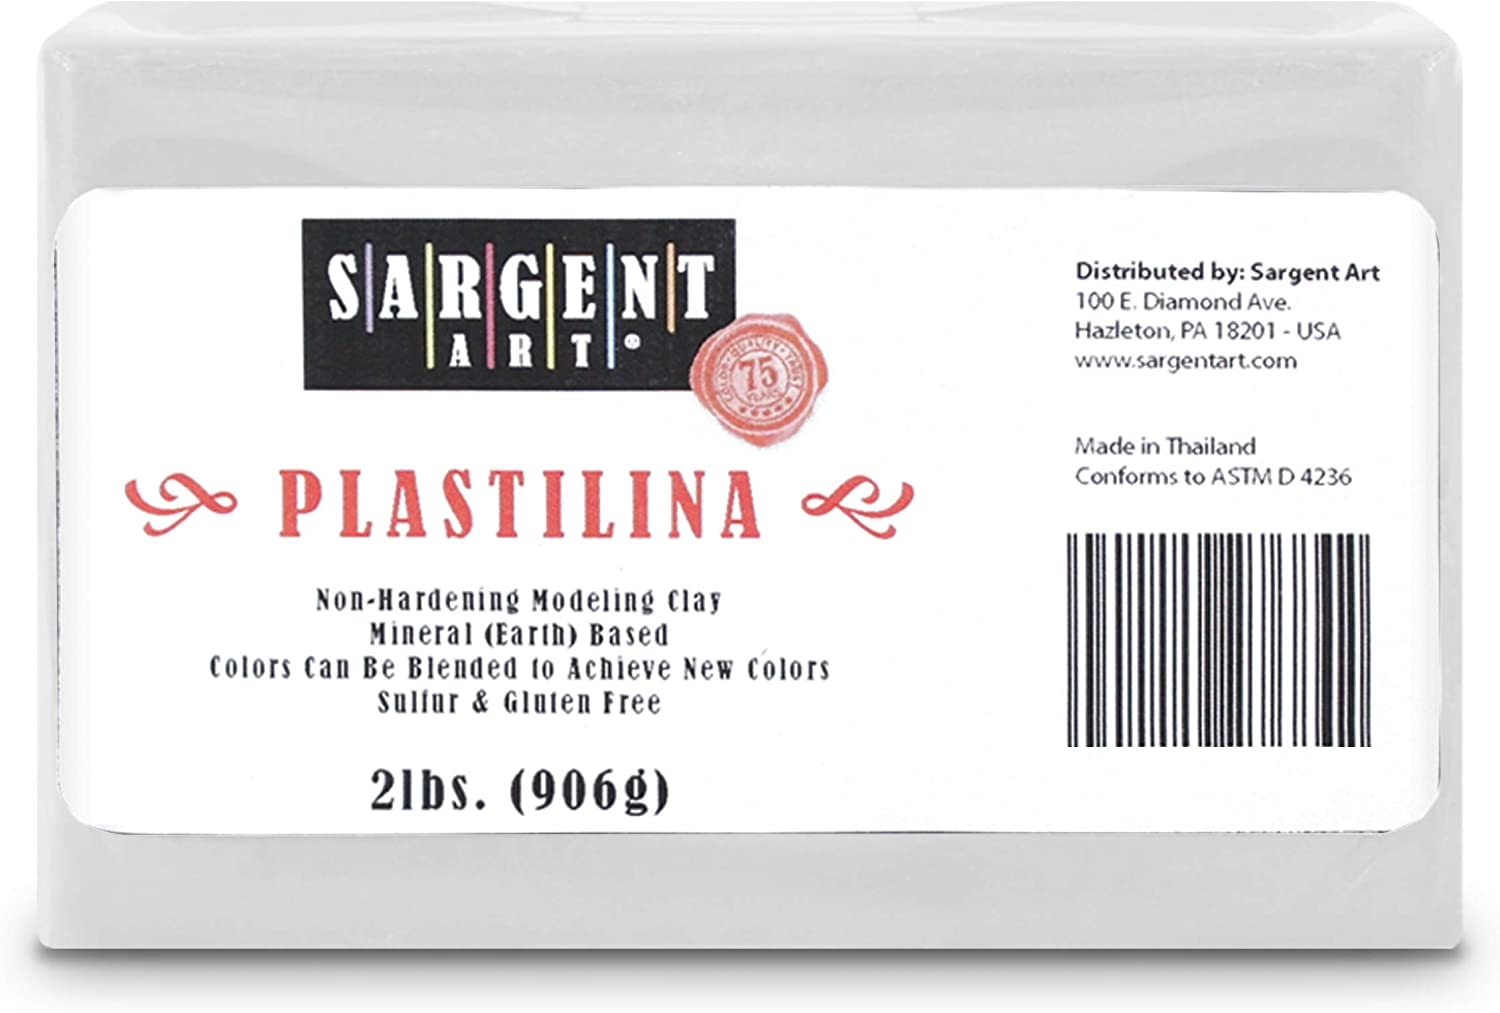 Sargent Art Plastilina Modeling Clay, White, 2 Pound, Non-Hardening, Long Lasting & Non-Toxic, Great for Kids, Beginners, and